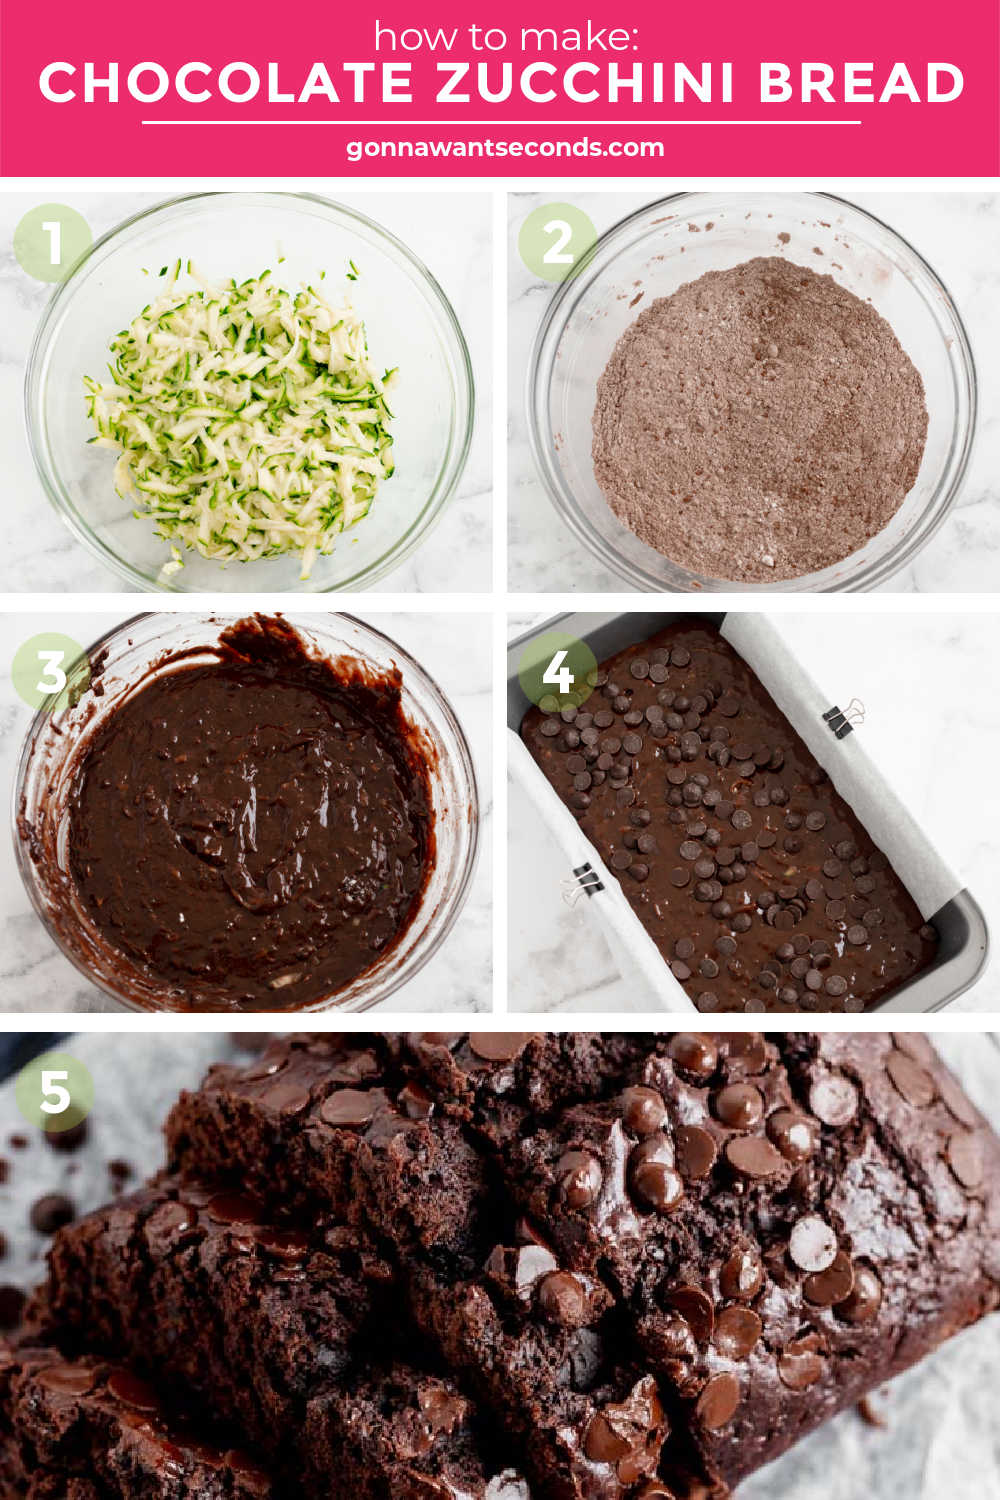 Step by step how to make chocolate zucchini bread